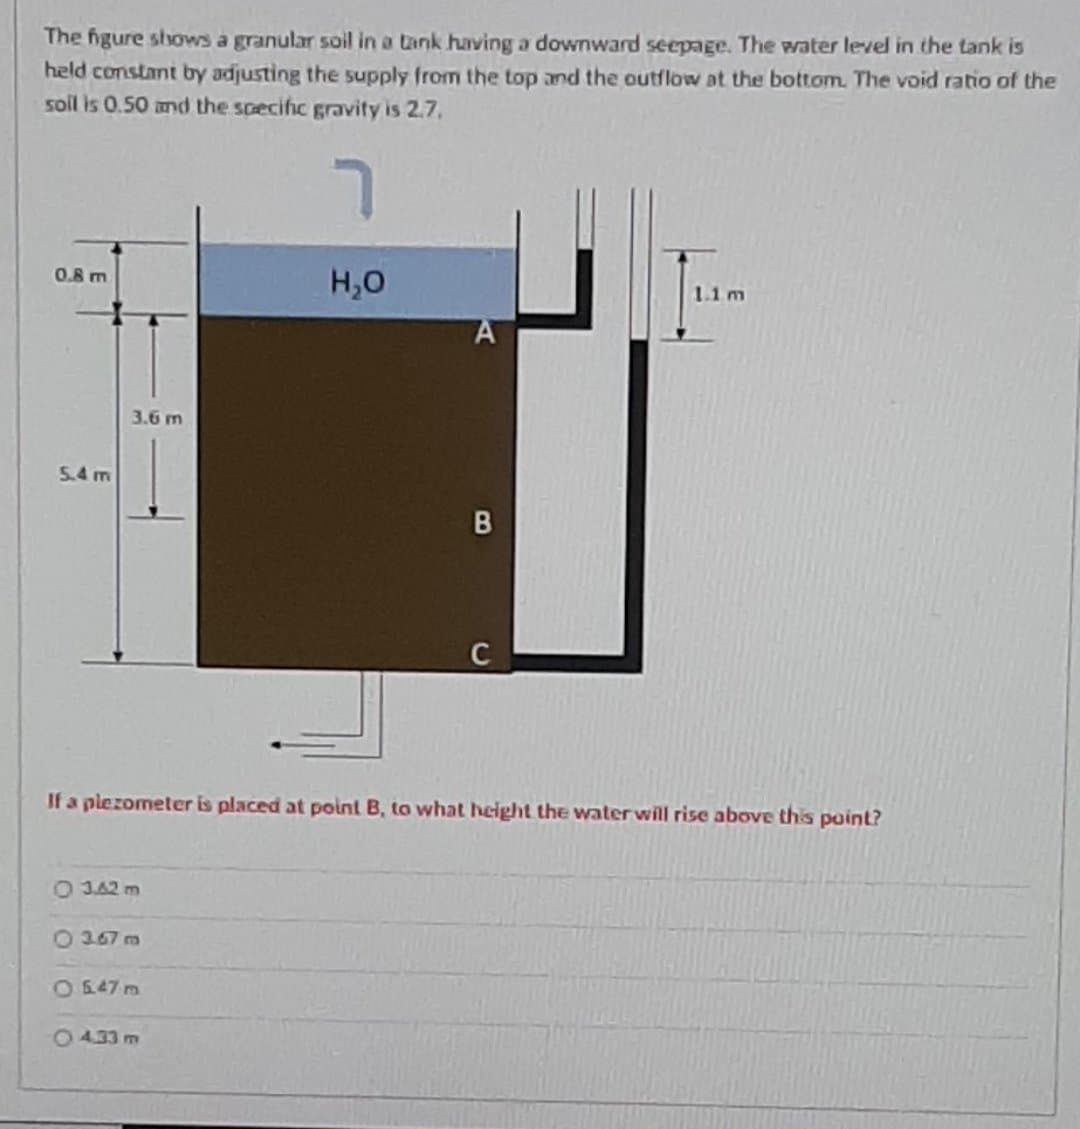 The igure shows a granular soil in a tank having a downward seepage. The water level in the tank is
held constant by adjusting the supply from the top and the outflow at the bottom. The void ratio of the
soil is 0.50 and the scecific gravity is 2.7,
H,0
0.8 m
11m
A
3.6 m
5.4 m
C
If a plezometer is placed at point B, to what height the water will rise above this point?
O 3.42 m
O 367 m
O 547 m
O 433 m
